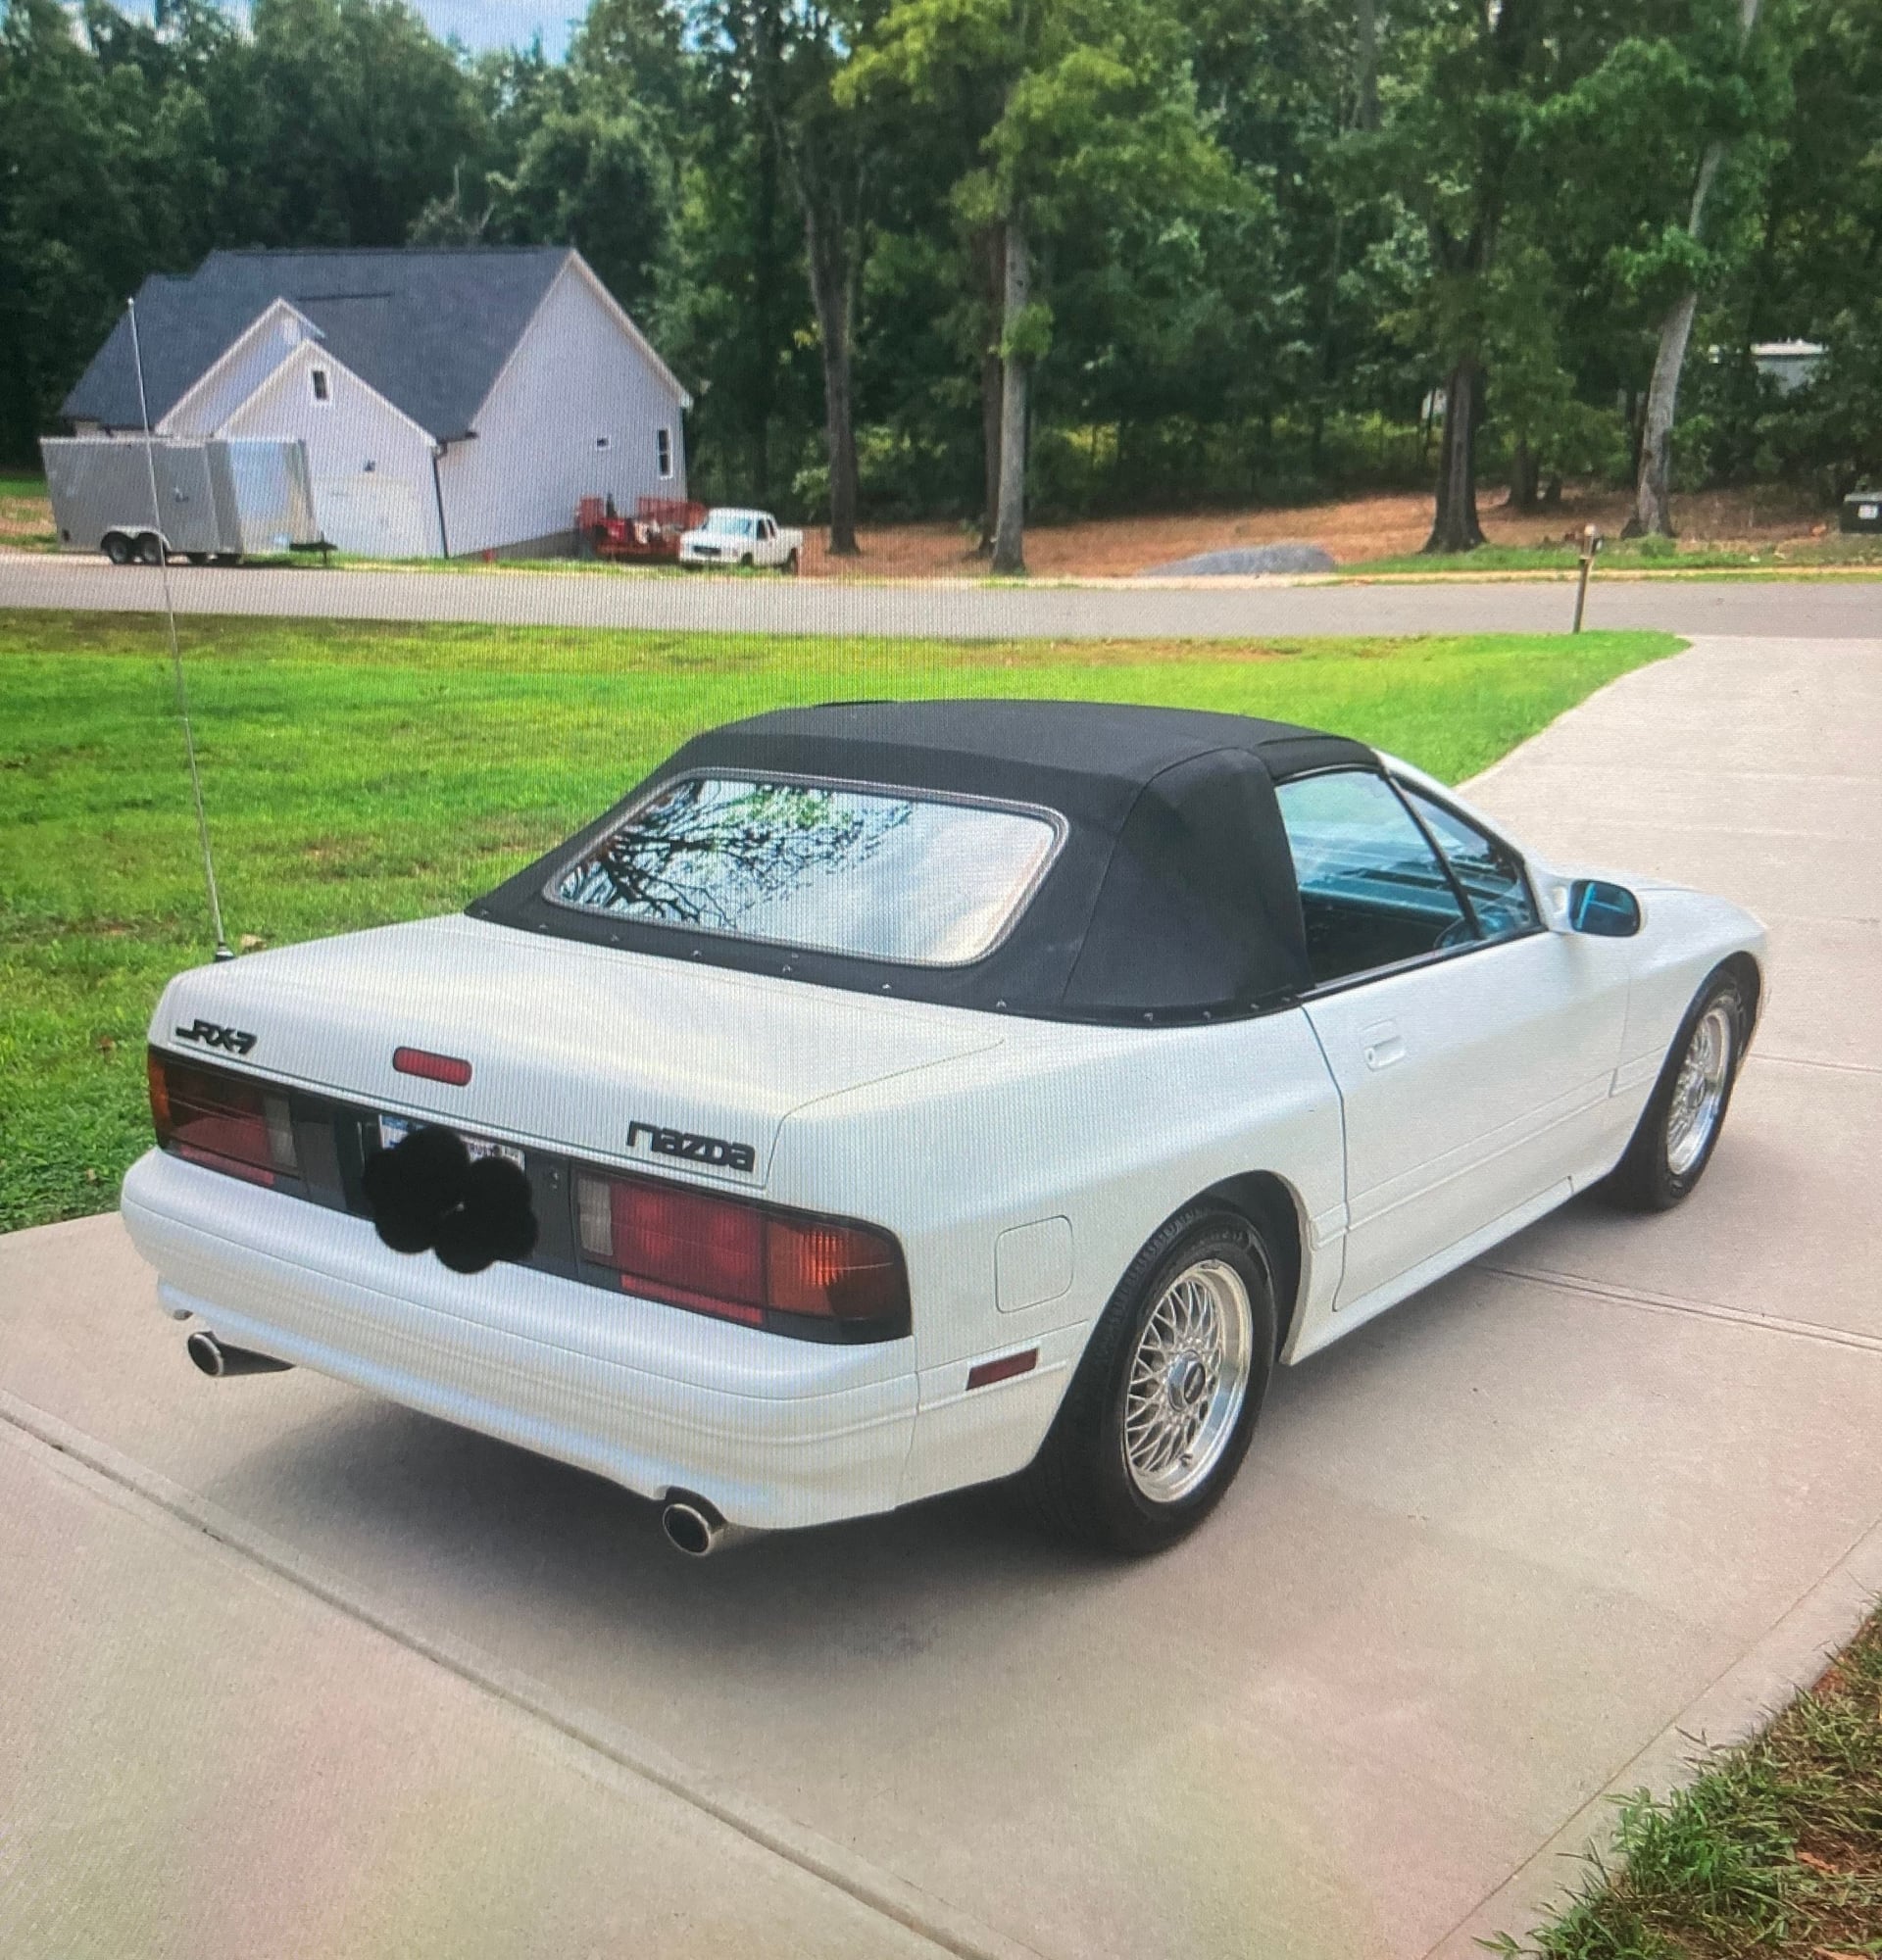 1990 Mazda RX-7 - 1990 Convertible Rx7 - Used - VIN JM1FC3527L0713107 - High Point, NC 27265, United States